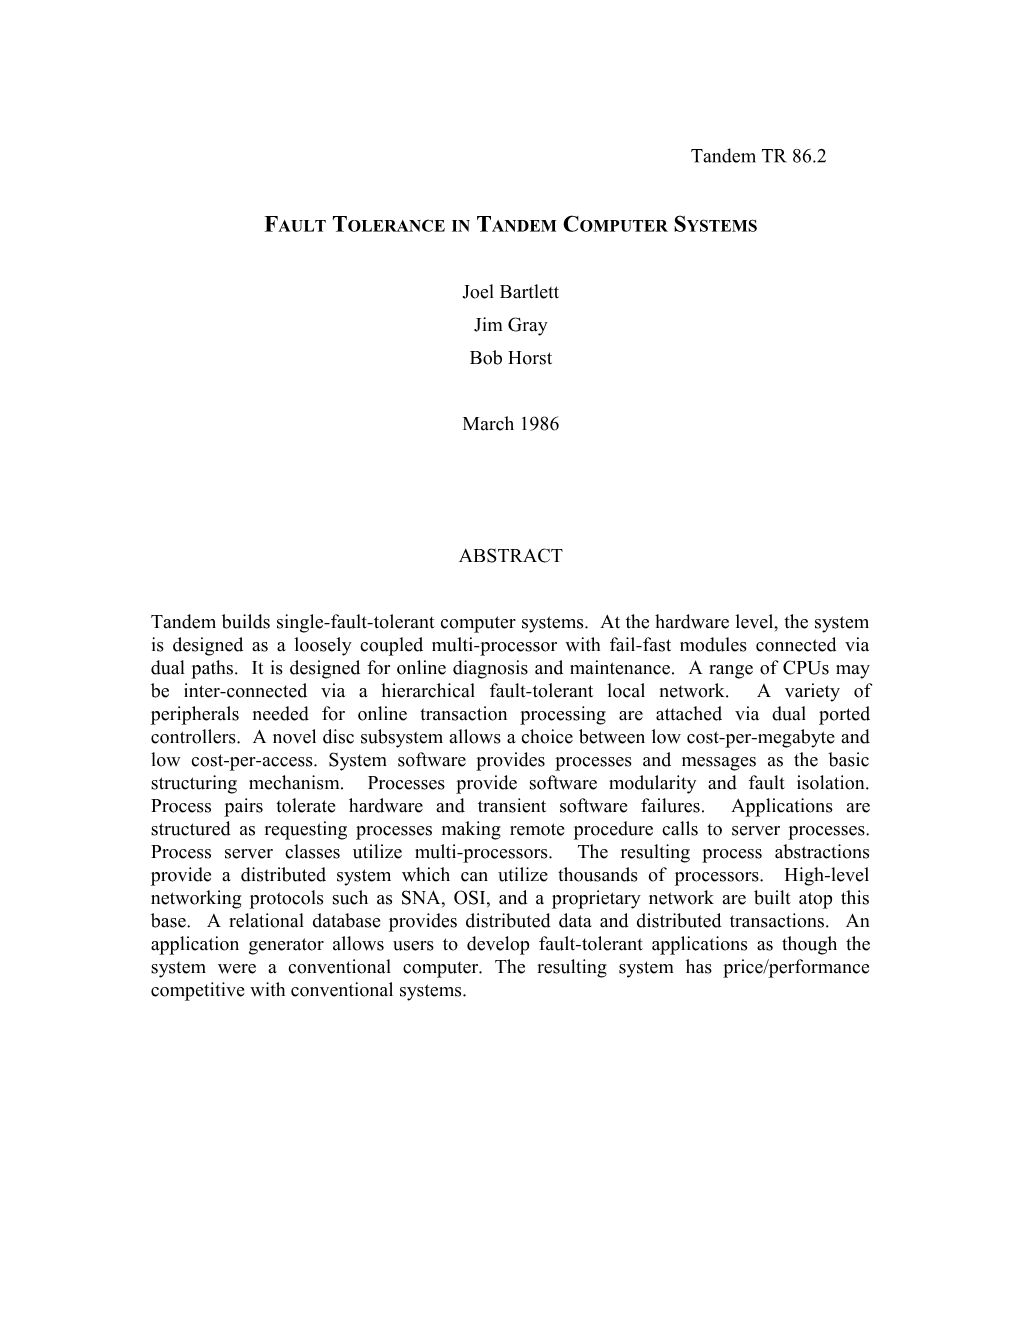 Fault Tolerance in Tandem Computer Systems